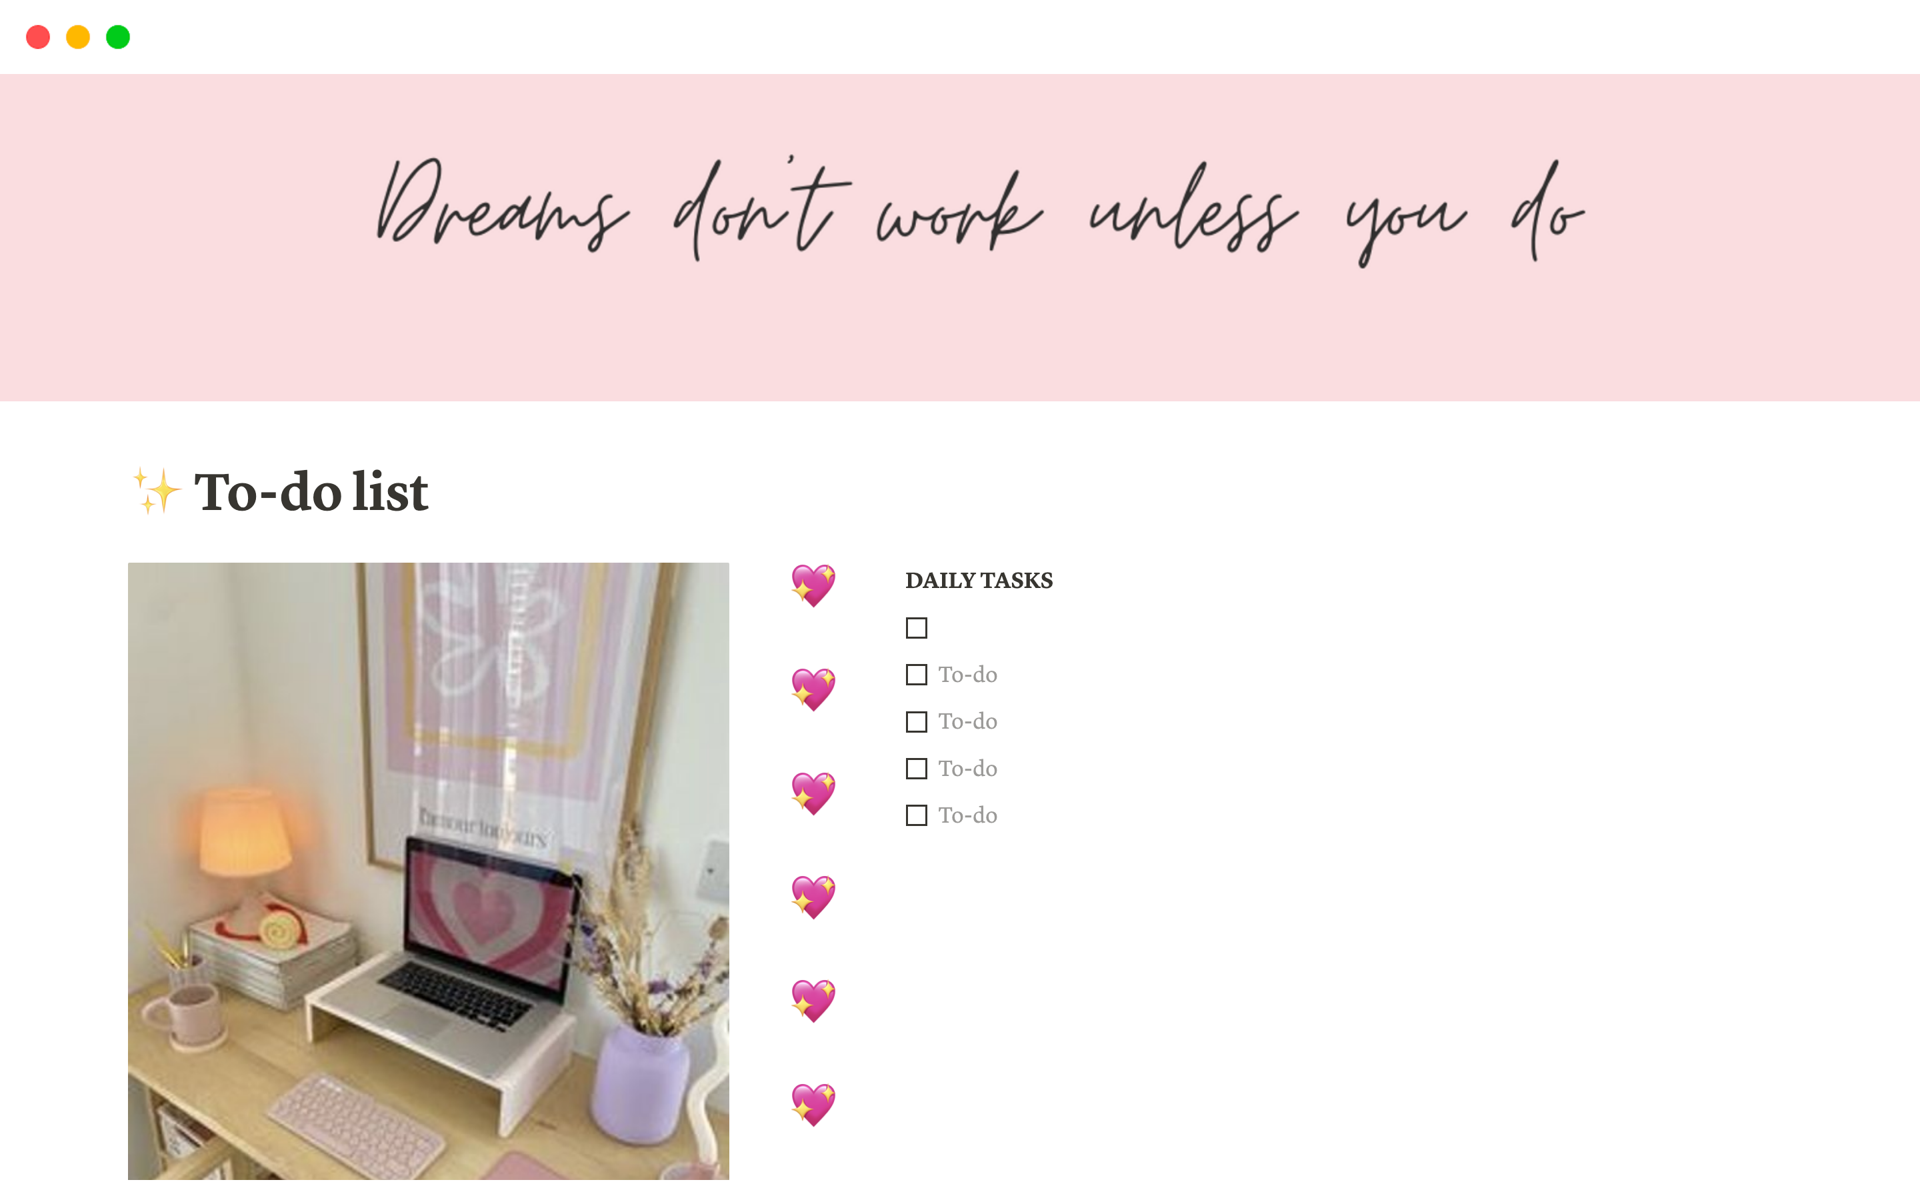 To-do list for organized girlies who want to manage their daily, weekly, or monthly tasks. 